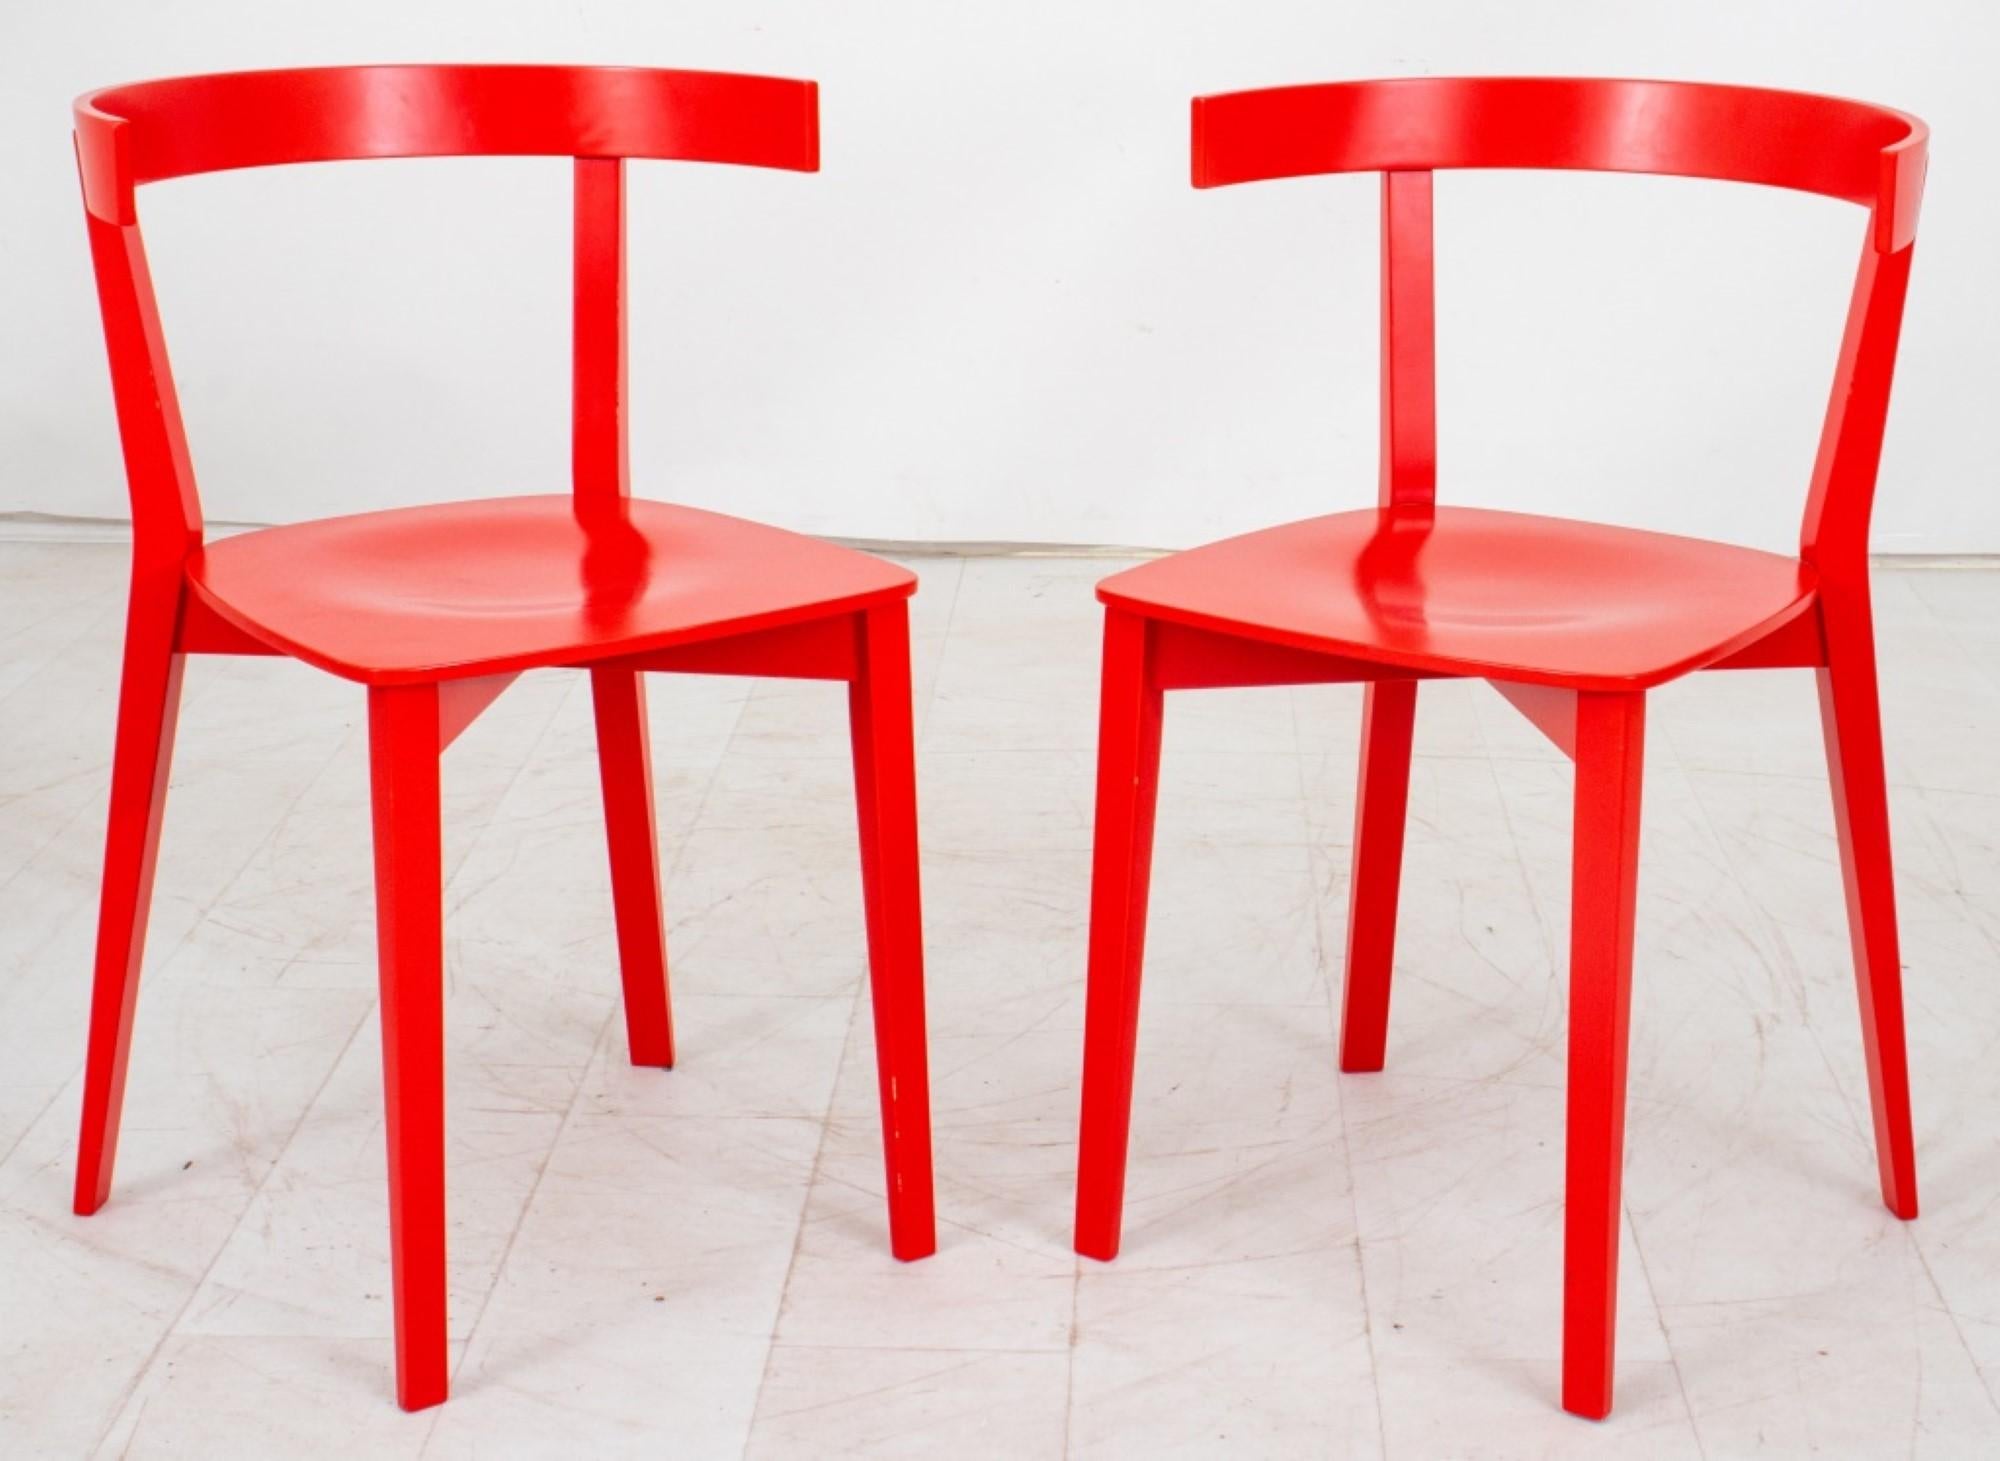 
The dimensions for the pair of Scandinavian Modern red plywood side chairs are approximately:

Height: 29 inches
Width: 18.75 inches
Depth: 17 inches
Seat Height: 18 inches